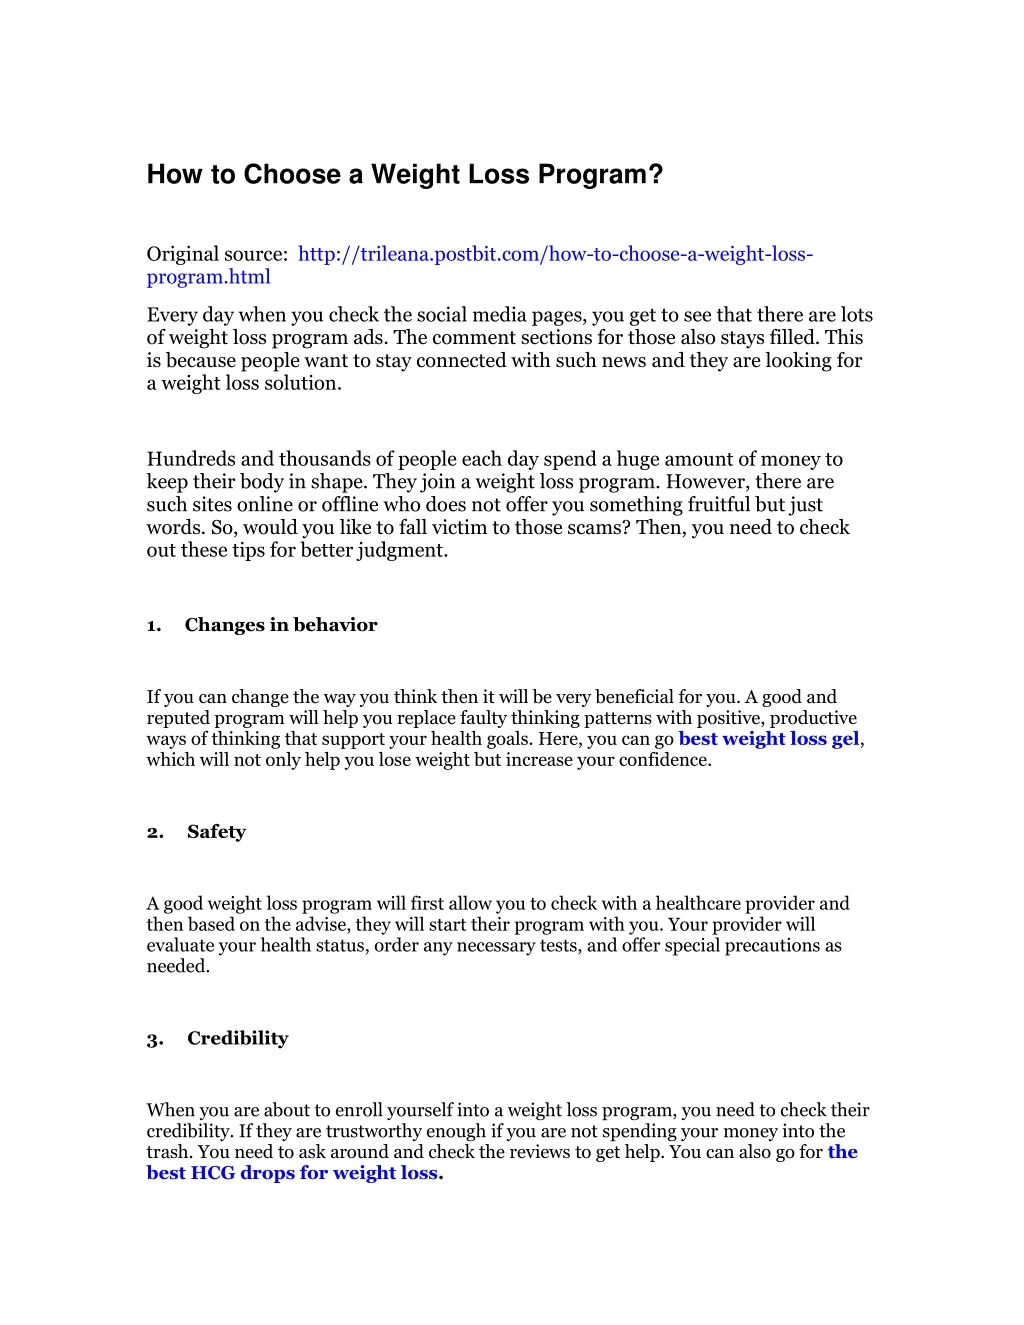 how to choose a weight loss program